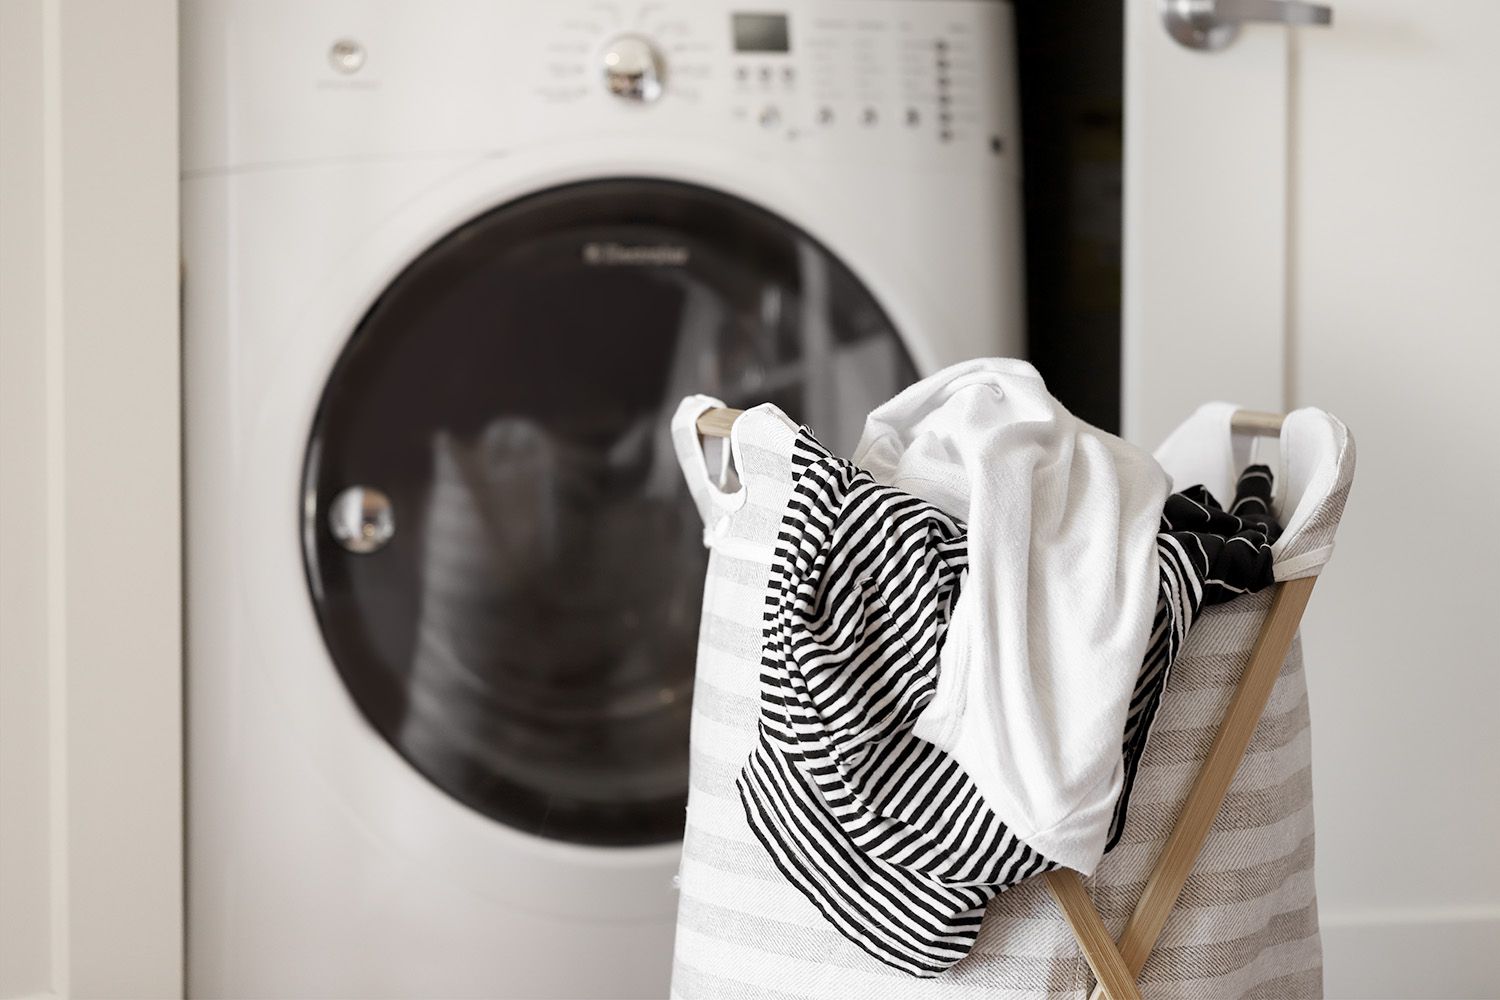 Sort Your Clothes For Laundry Success